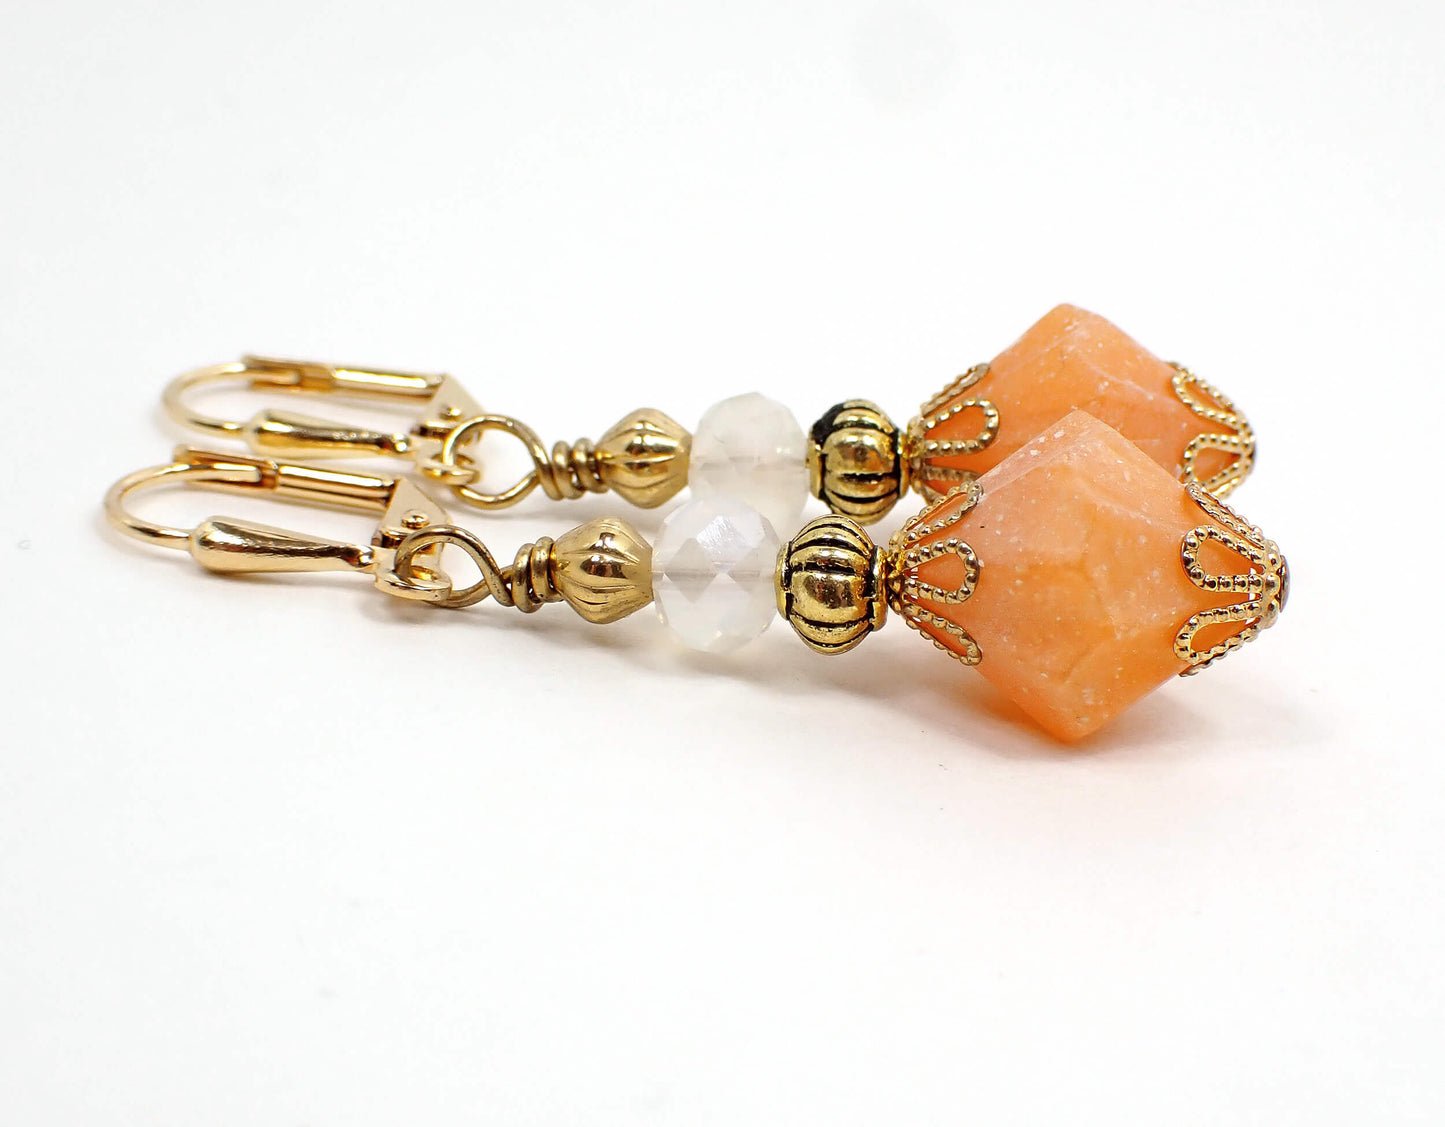 Frosted Matte Peach Acrylic Handmade Drop Earrings, Gold Plated Hook Lever Back or Clip On